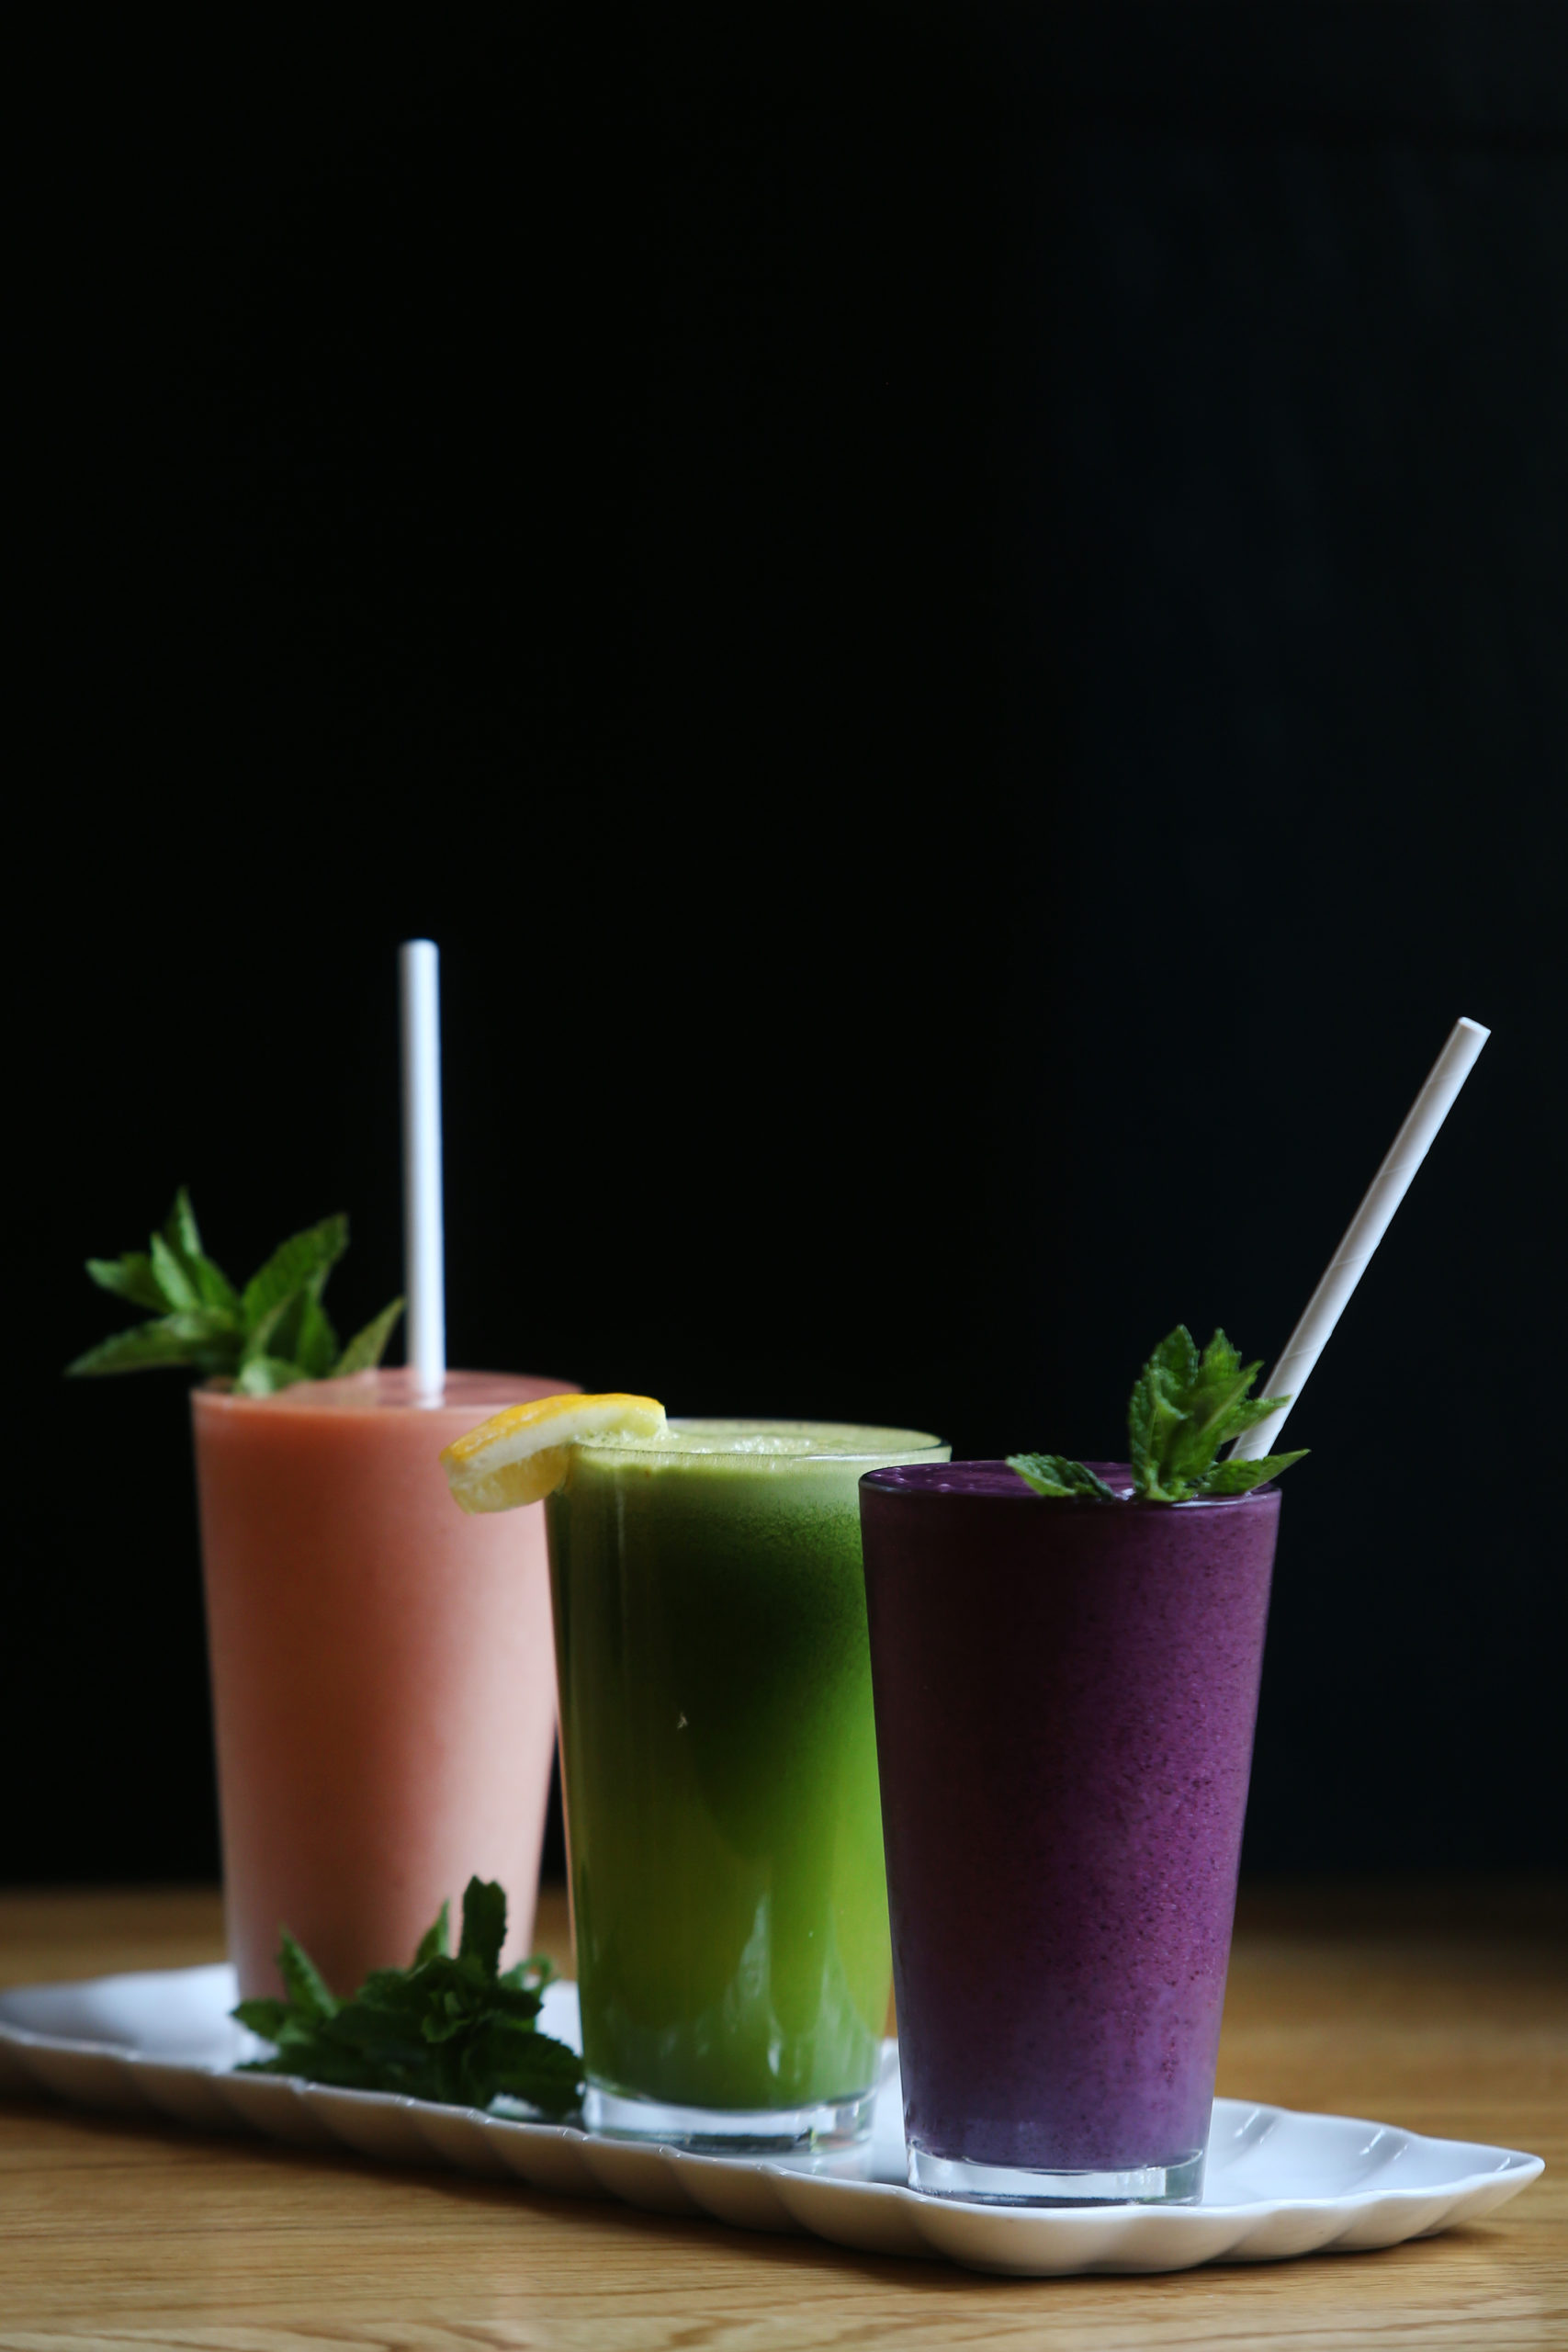 (From right)Omega smoothie, Goodness Green juice blend, and the Shooting Star smoothie at the Howard Station Cafe in Occidental, Calif., on Thursday, May 13, 2021. (Beth Schlanker/Sonoma Magazine)